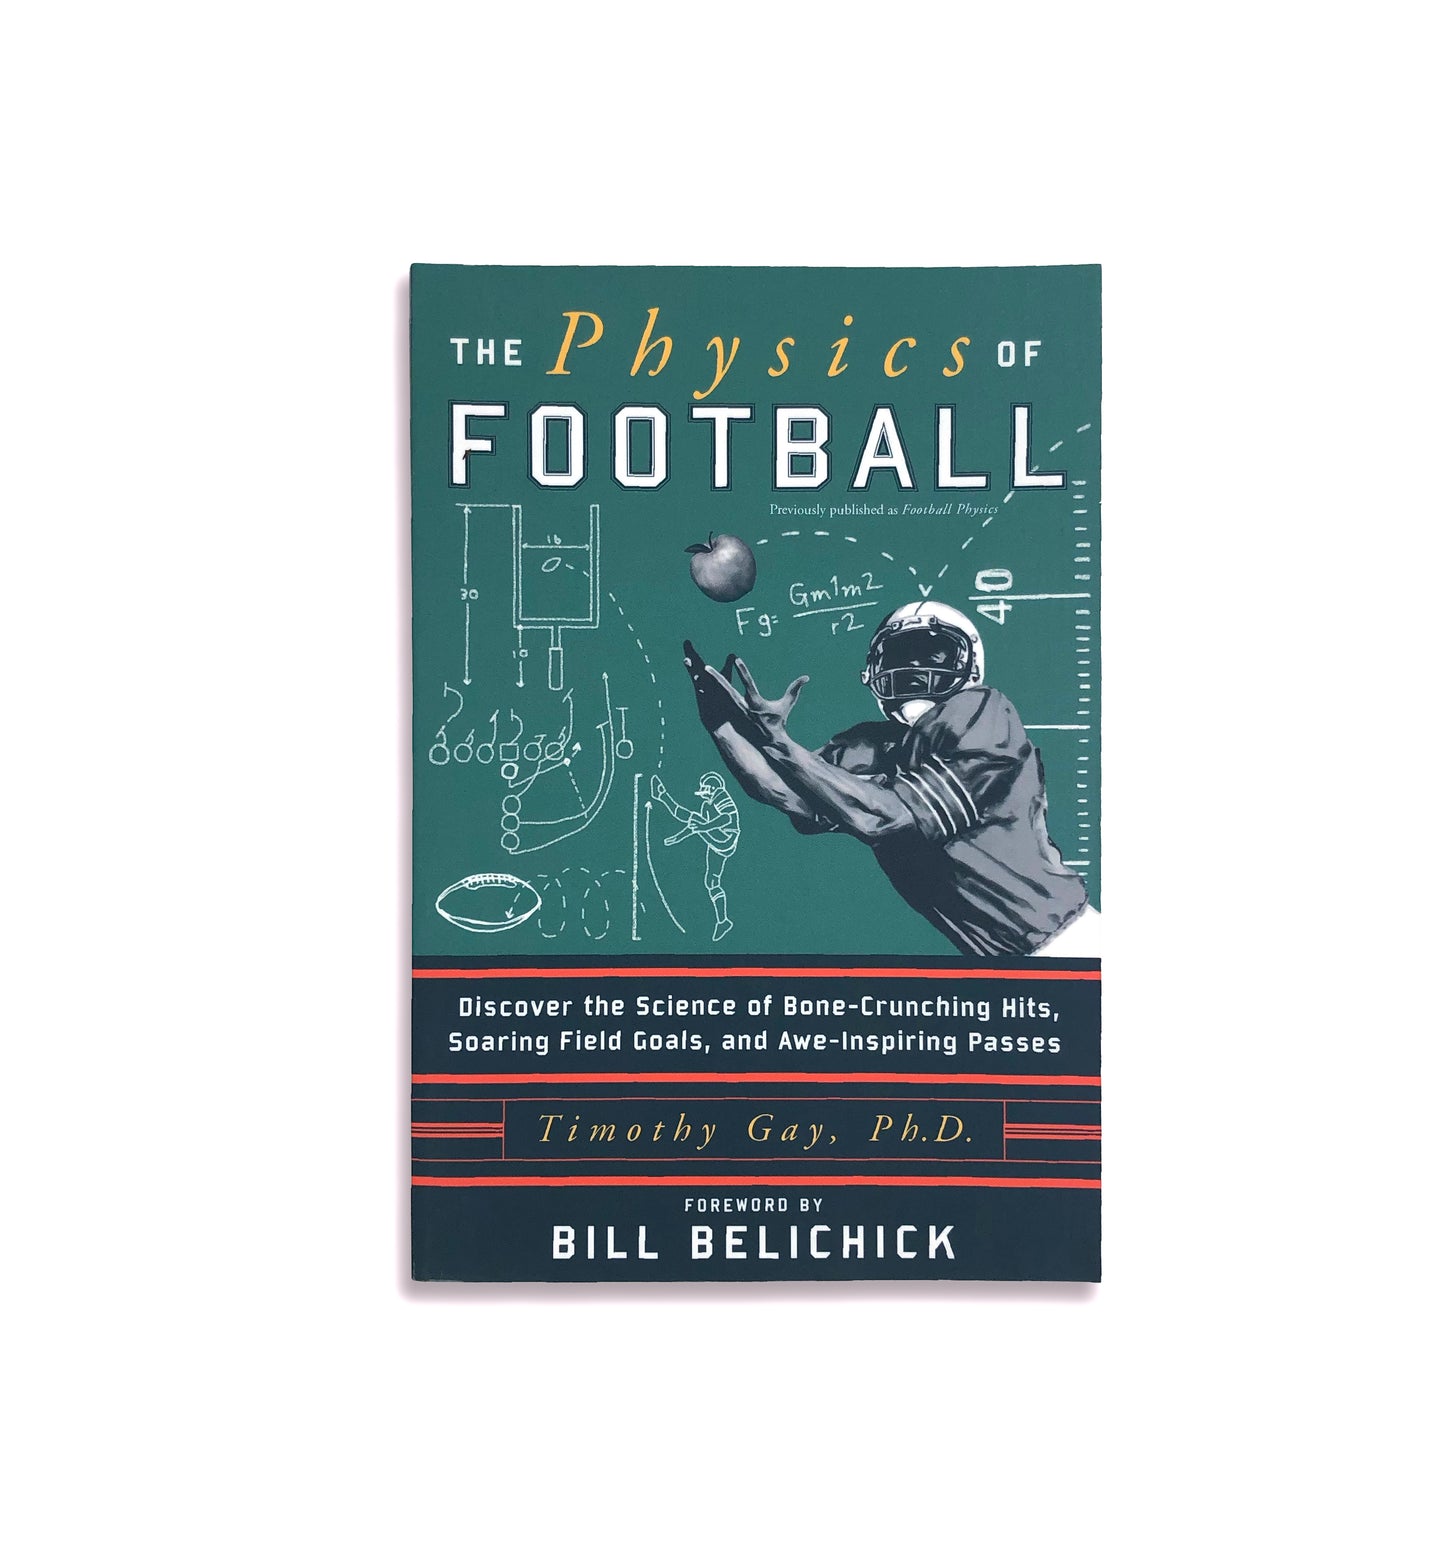 The Physics of Football: Discover the Science of Bone-Crunching Hits, Soaring Field Goals, and Awe-Inspiring Passes - Timothy Gay (paperback)